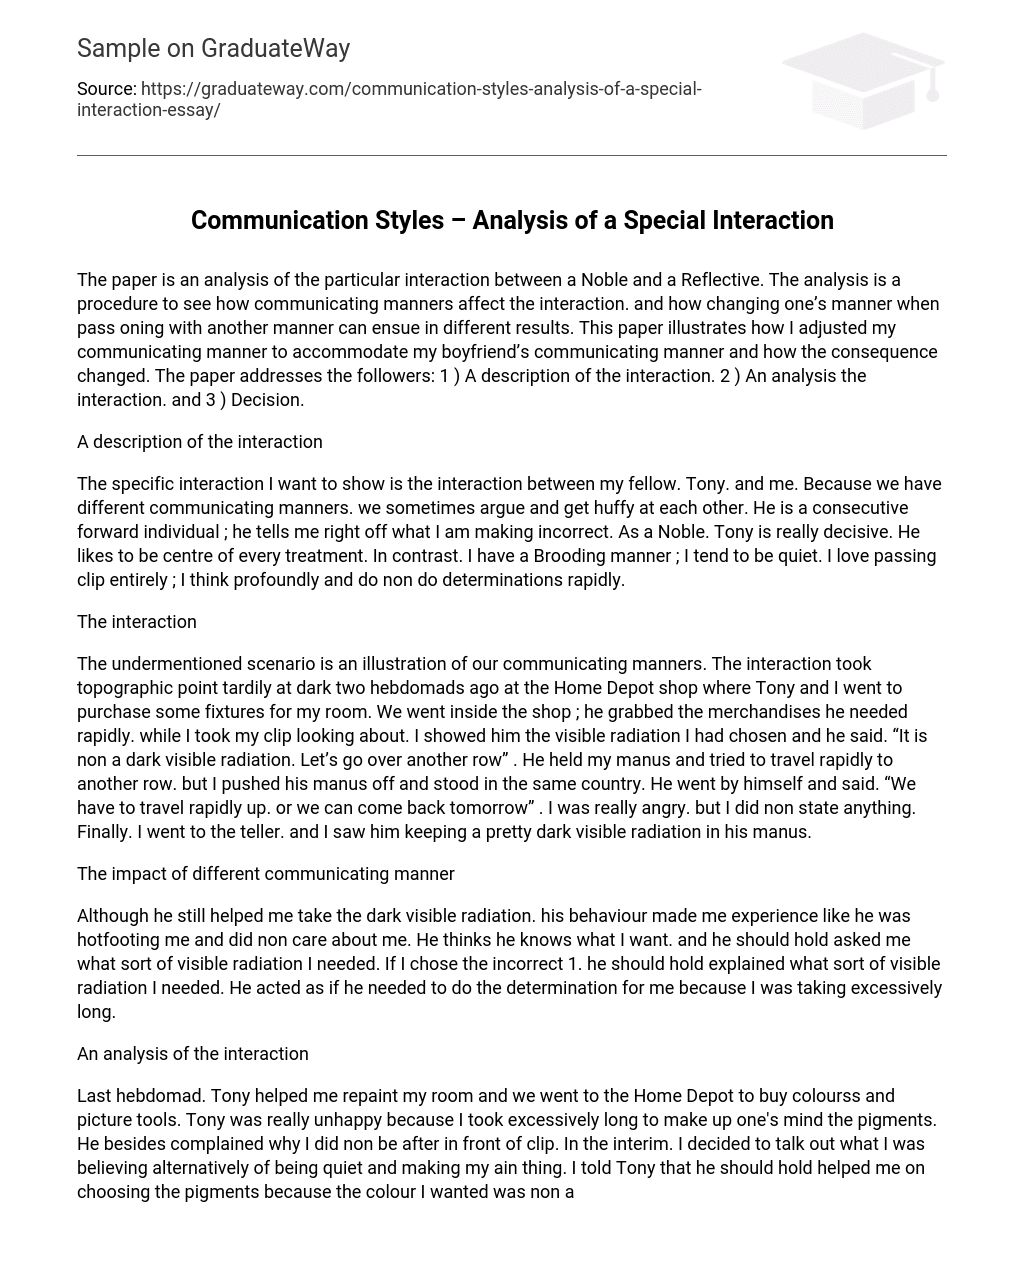 Communication Styles – Analysis of a Special Interaction